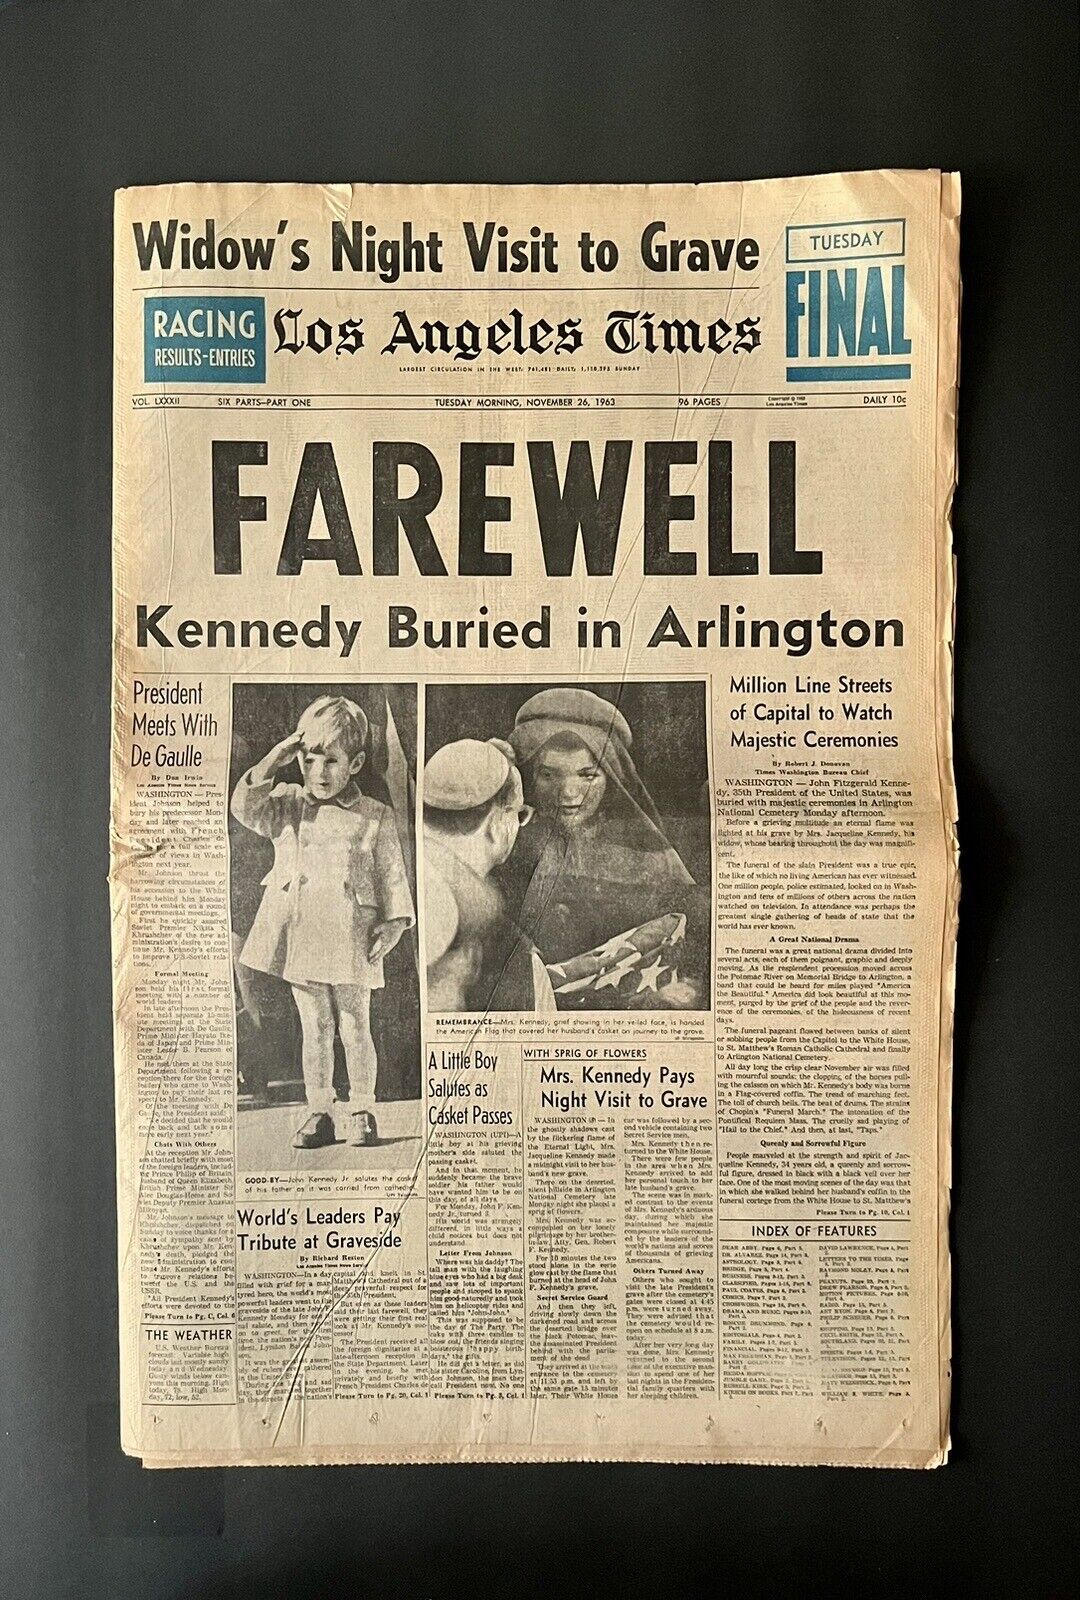 Los Angeles Times 1963 Farewell, Kennedy Buried in Arlington